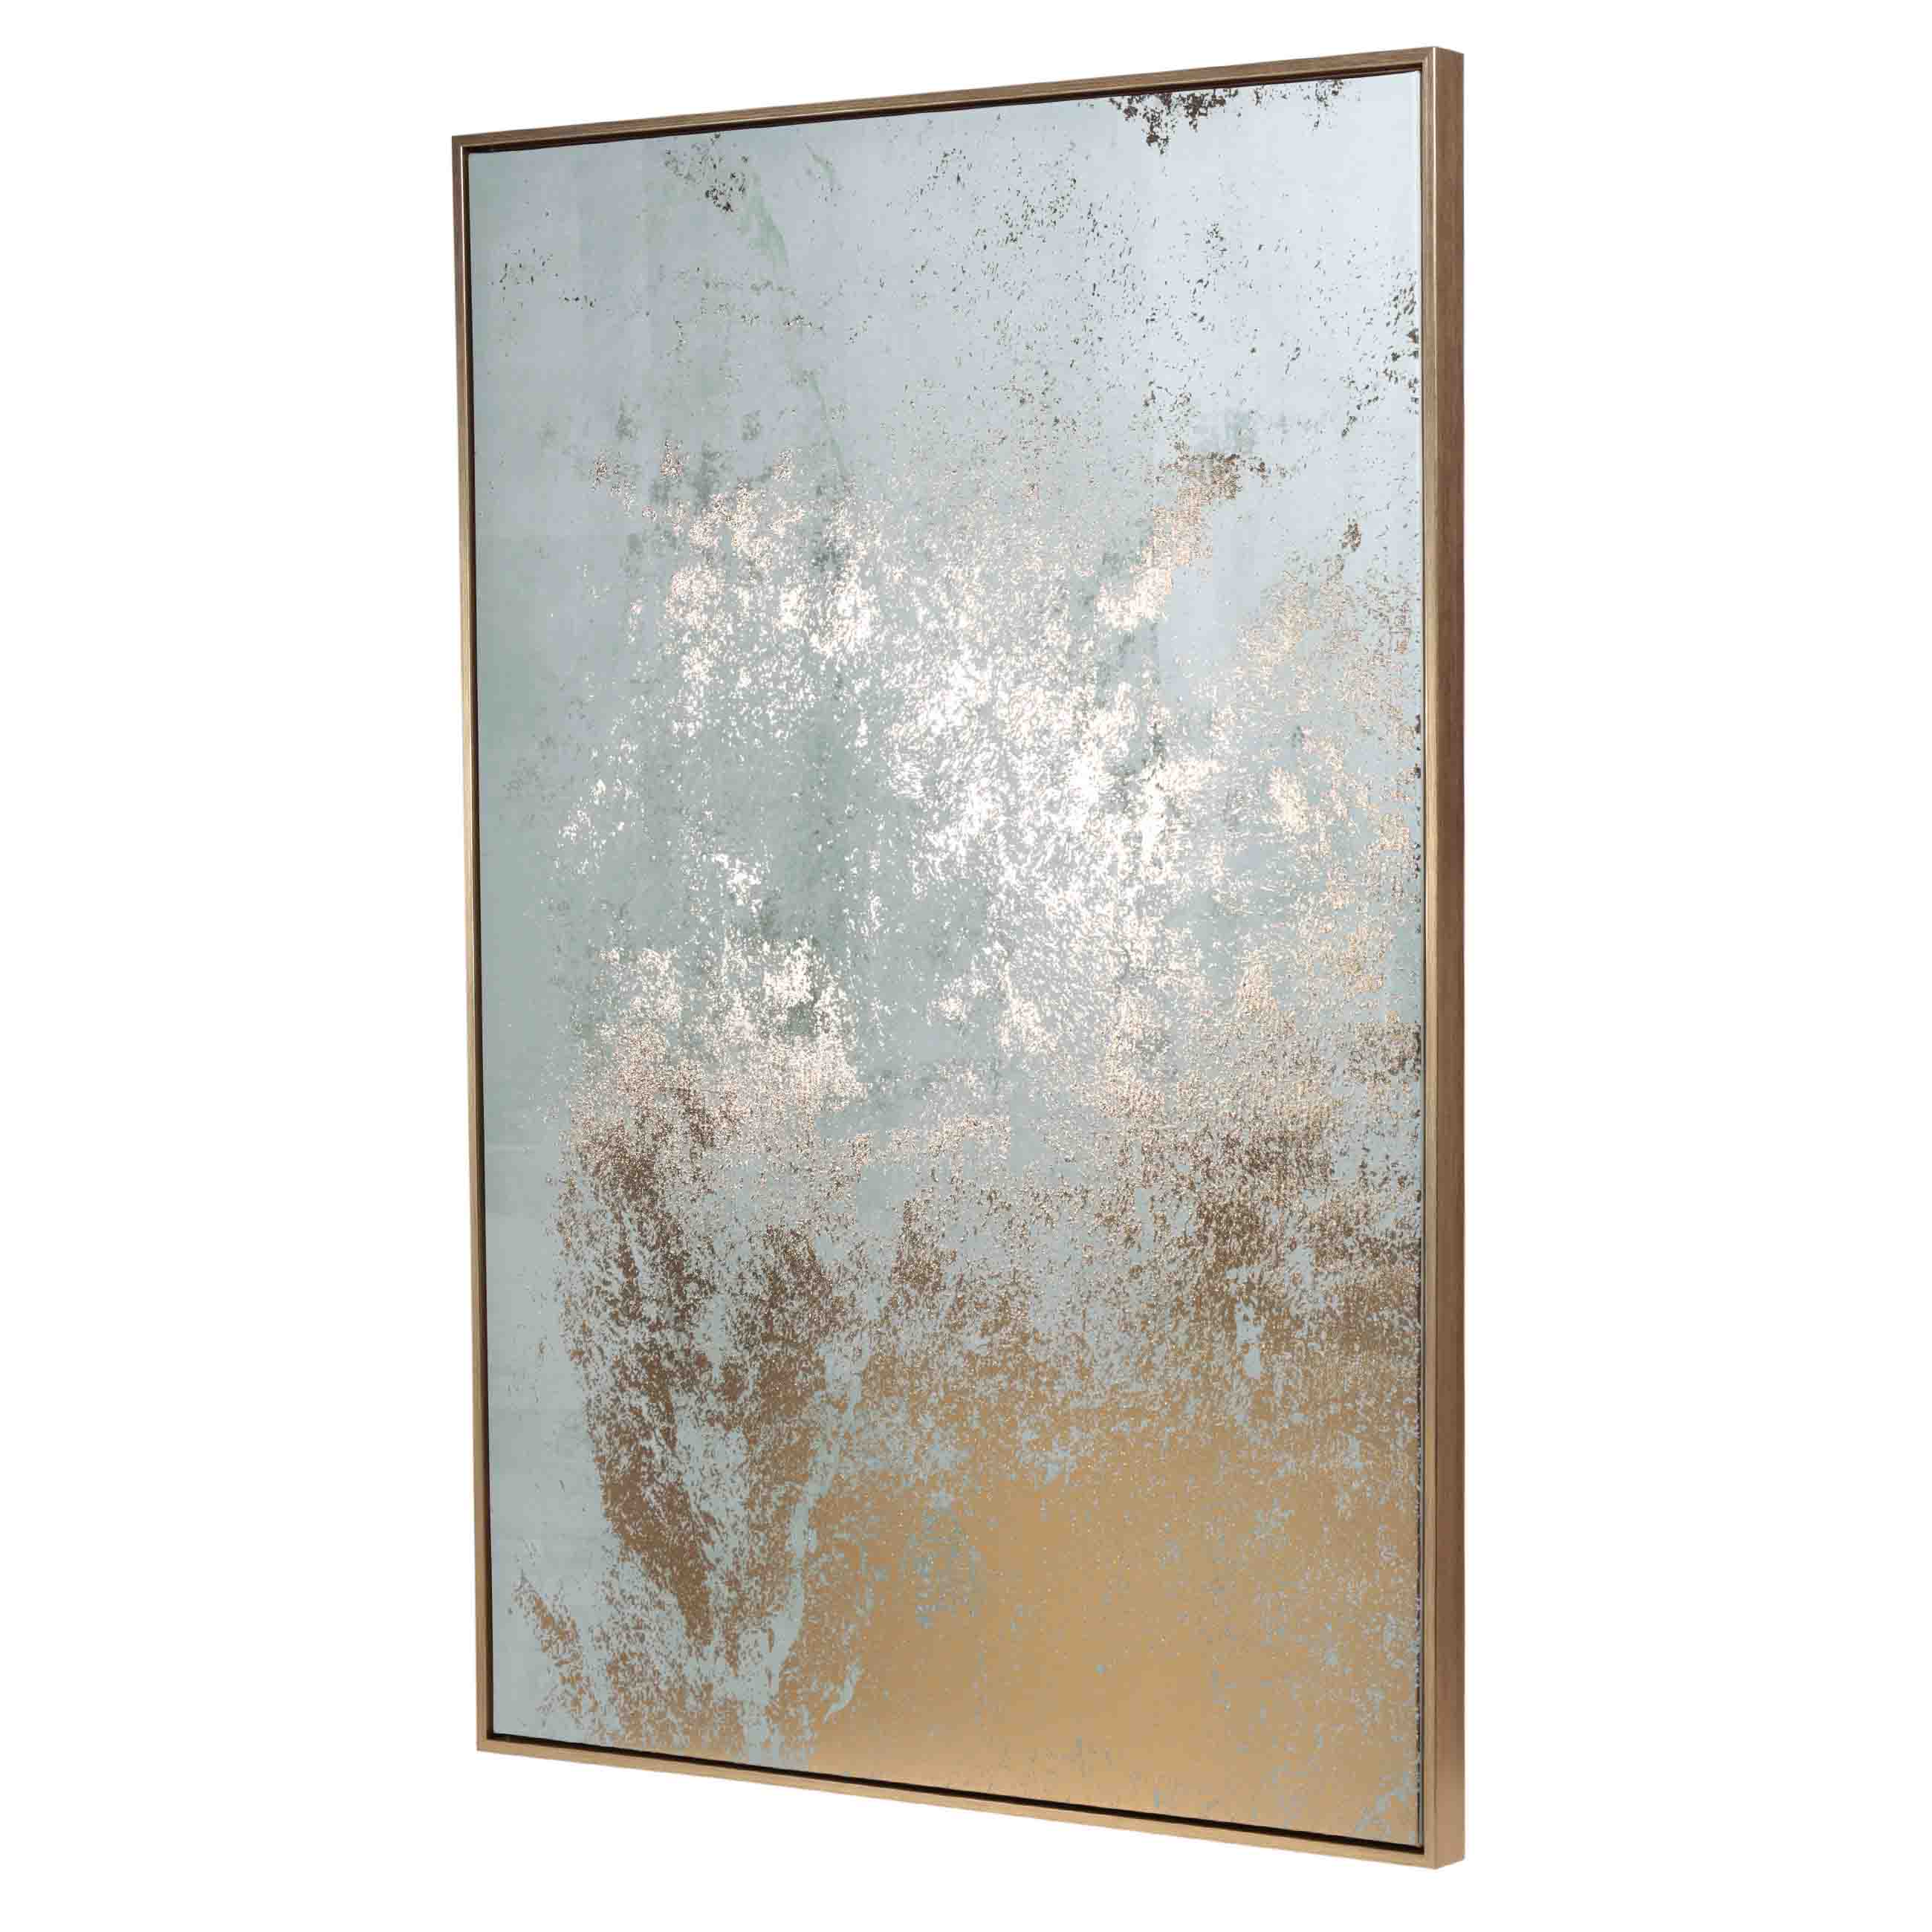 Painting in a frame, 80x120 cm, canvas, gray-gold, Abstract изображение № 2